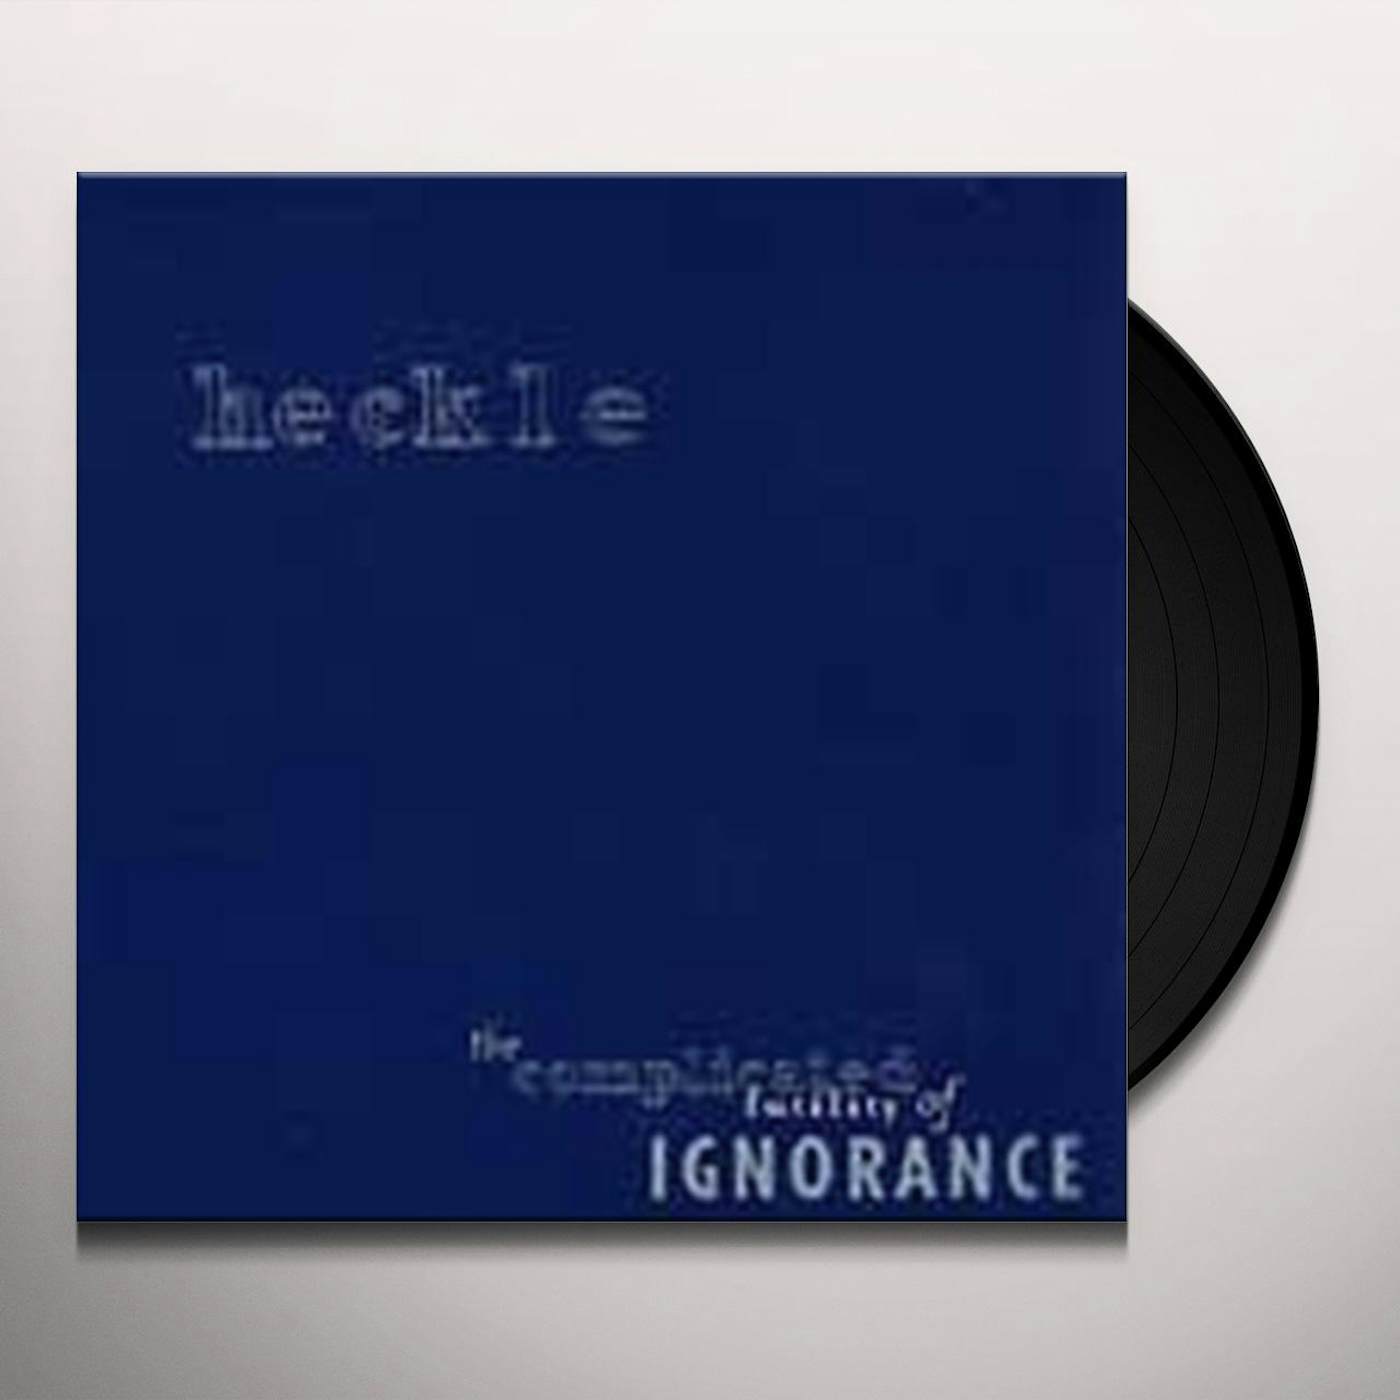 Heckle COMPLICATED FUTILITY OF IGNORANCE Vinyl Record